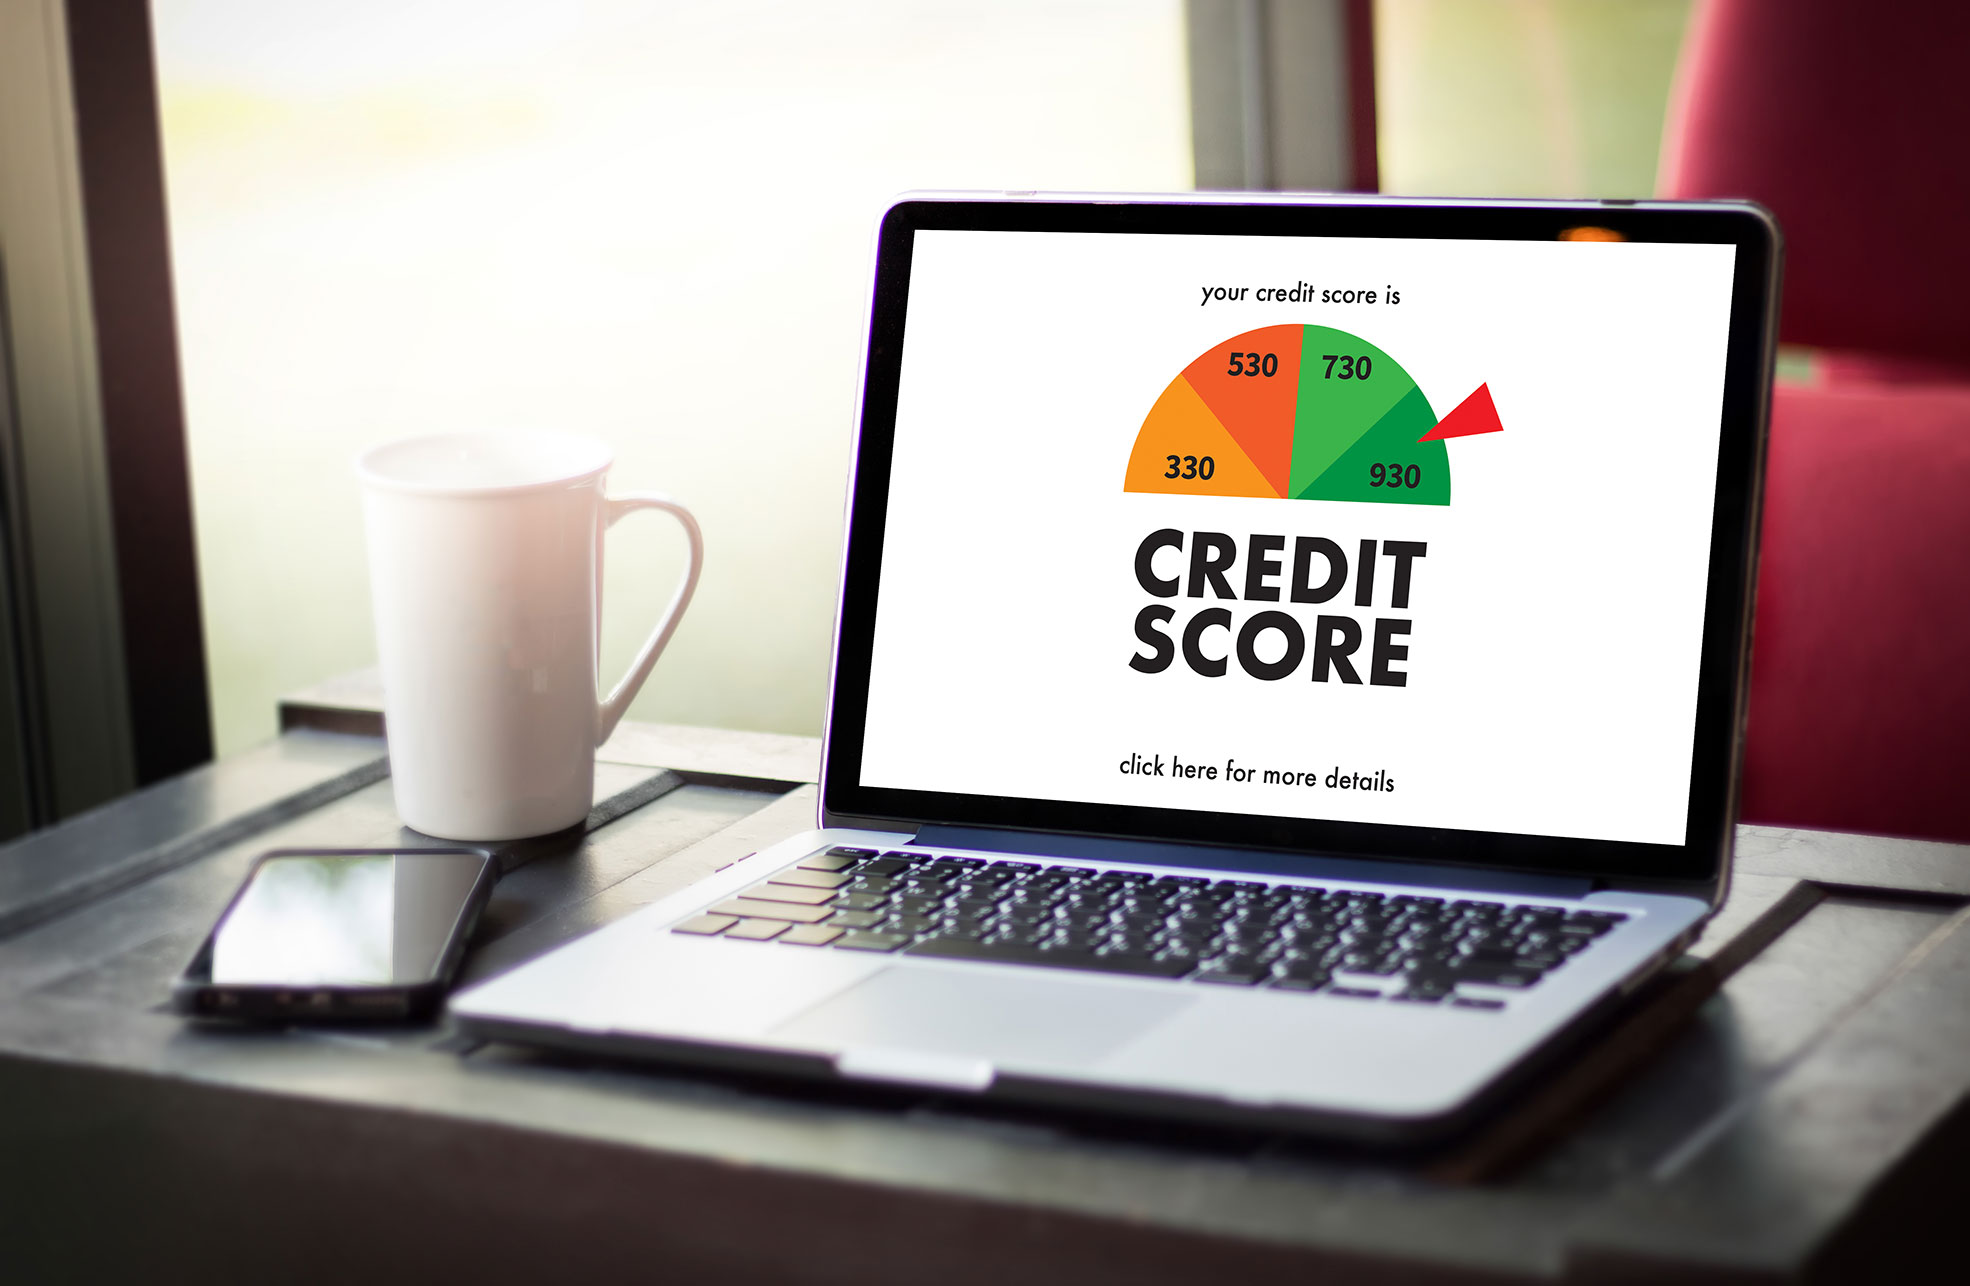 Credit Karma Update Frequency: Stay On Top Of Your Credit Score With Regular Updates